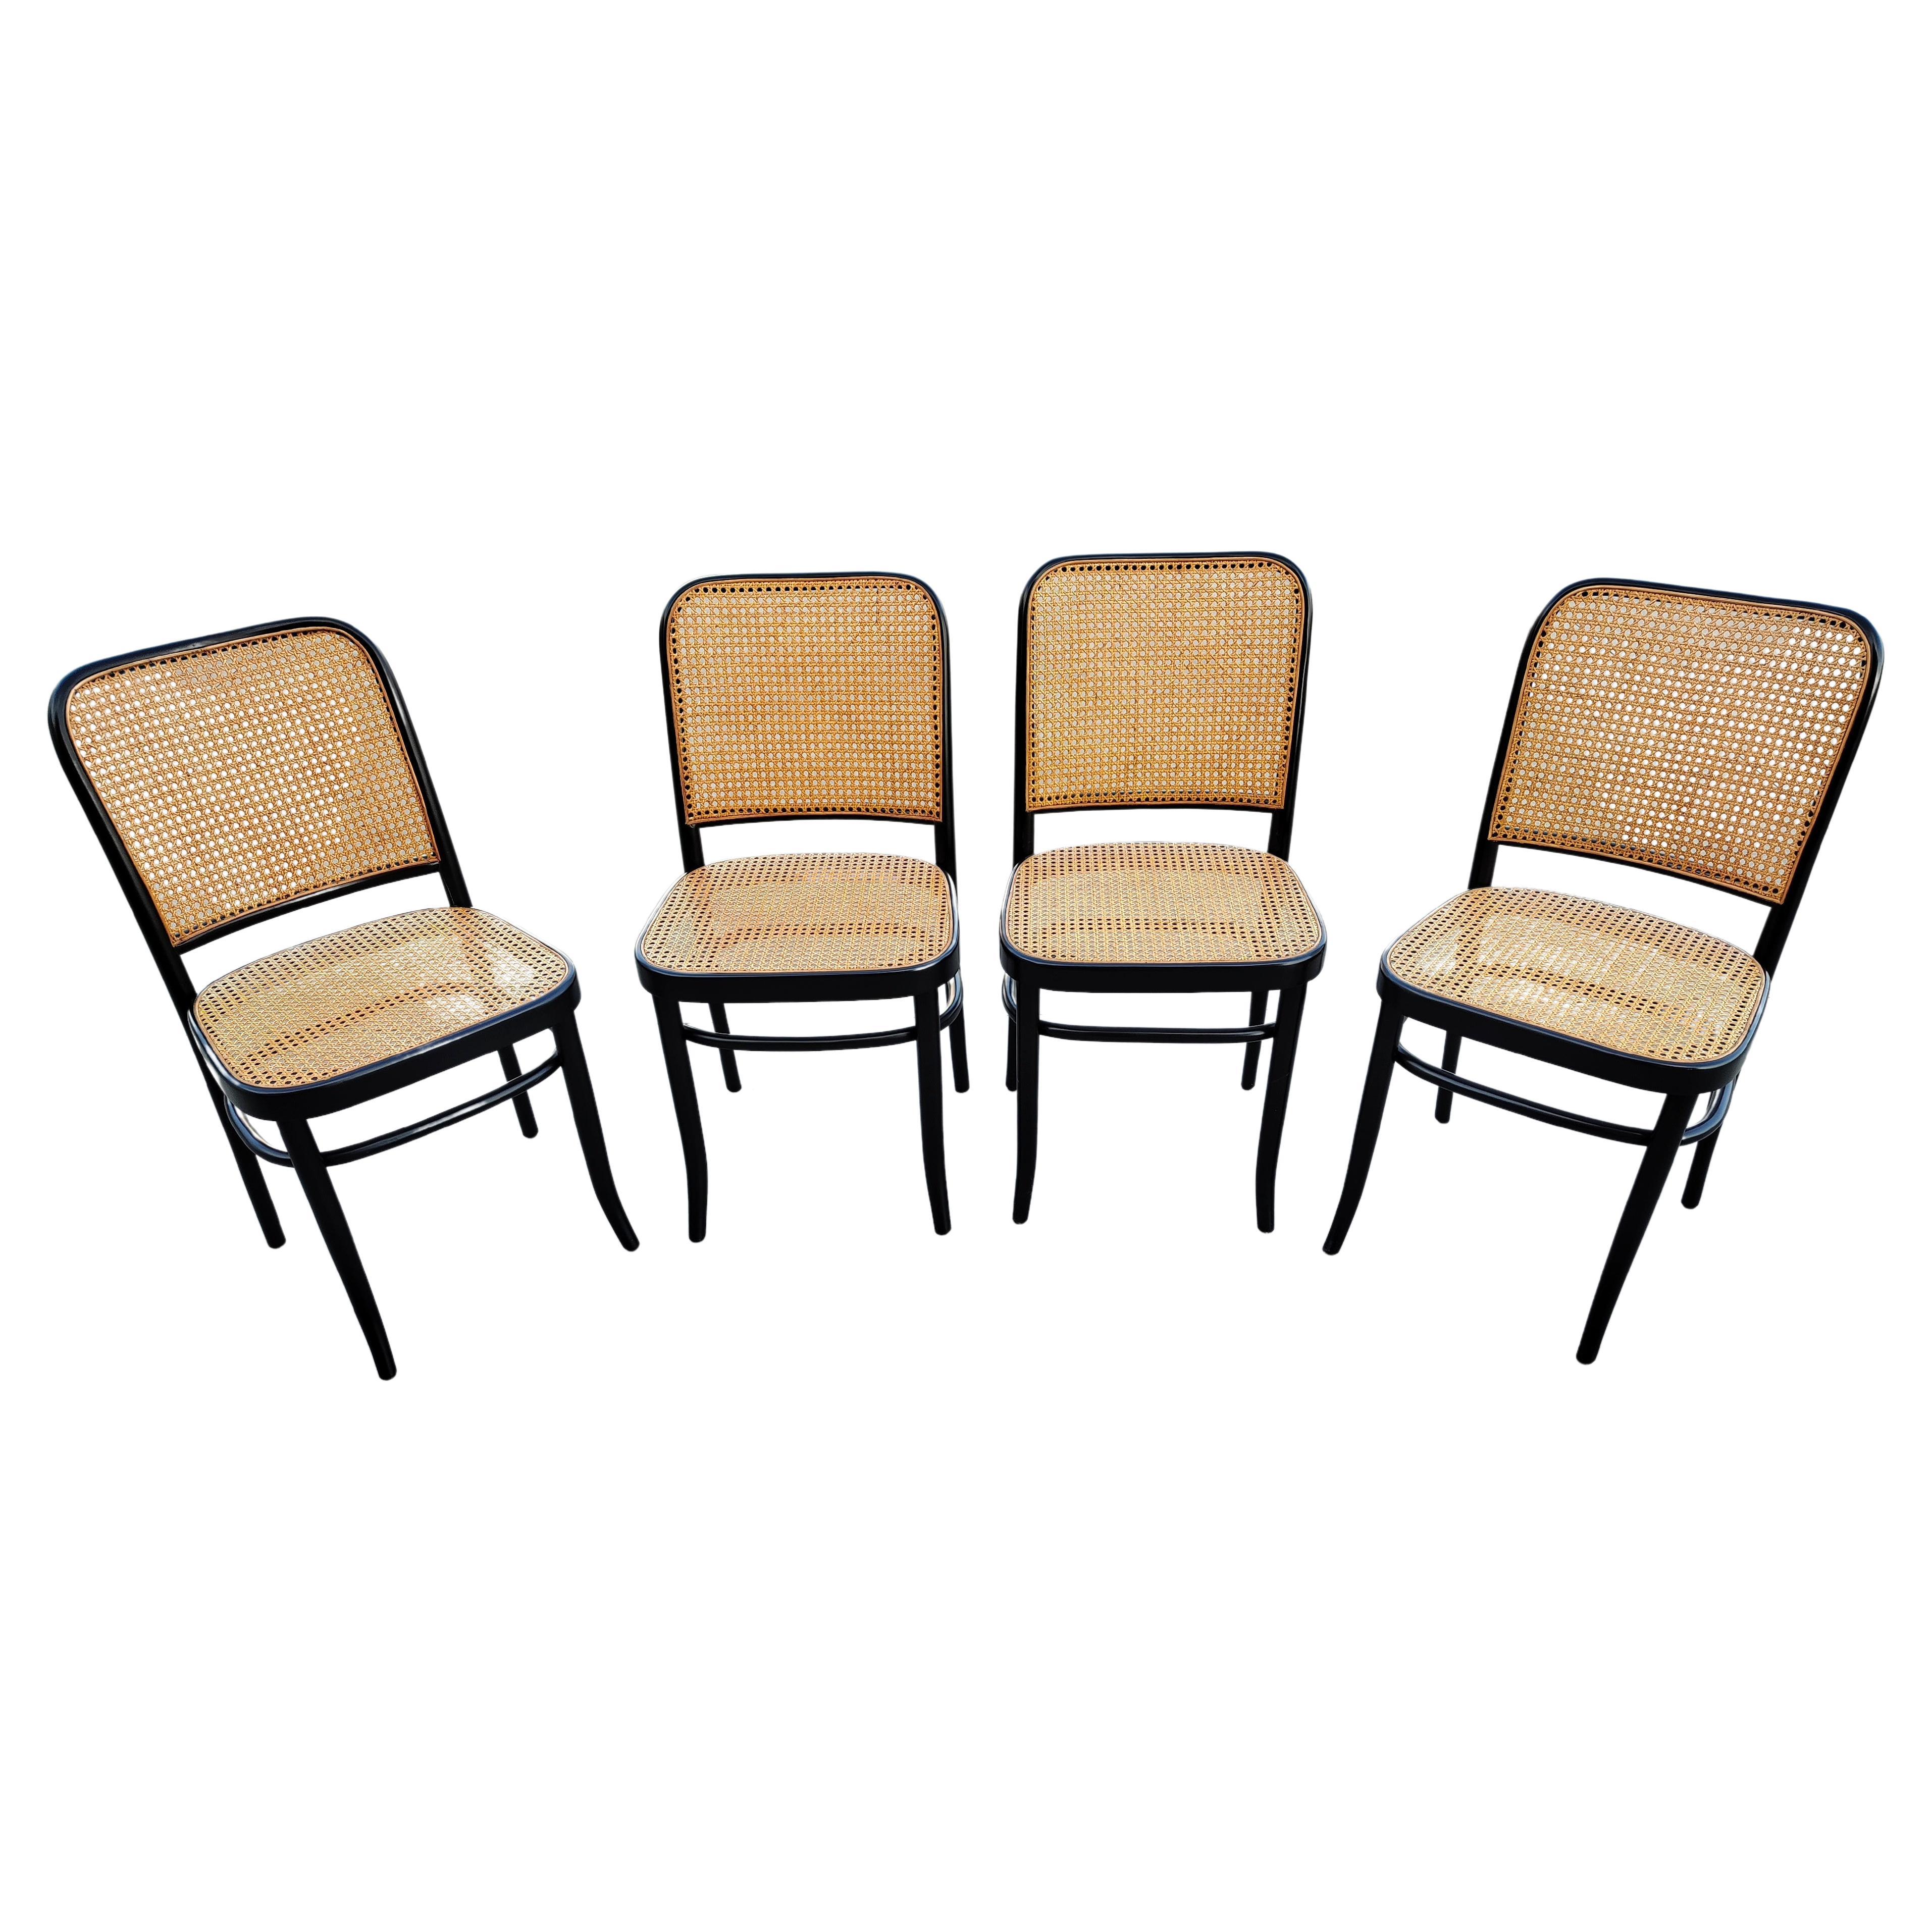 Set of 4 Rare Dining Chairs by Josef Hoffmann for Mundus, Yugoslavia, 1960s